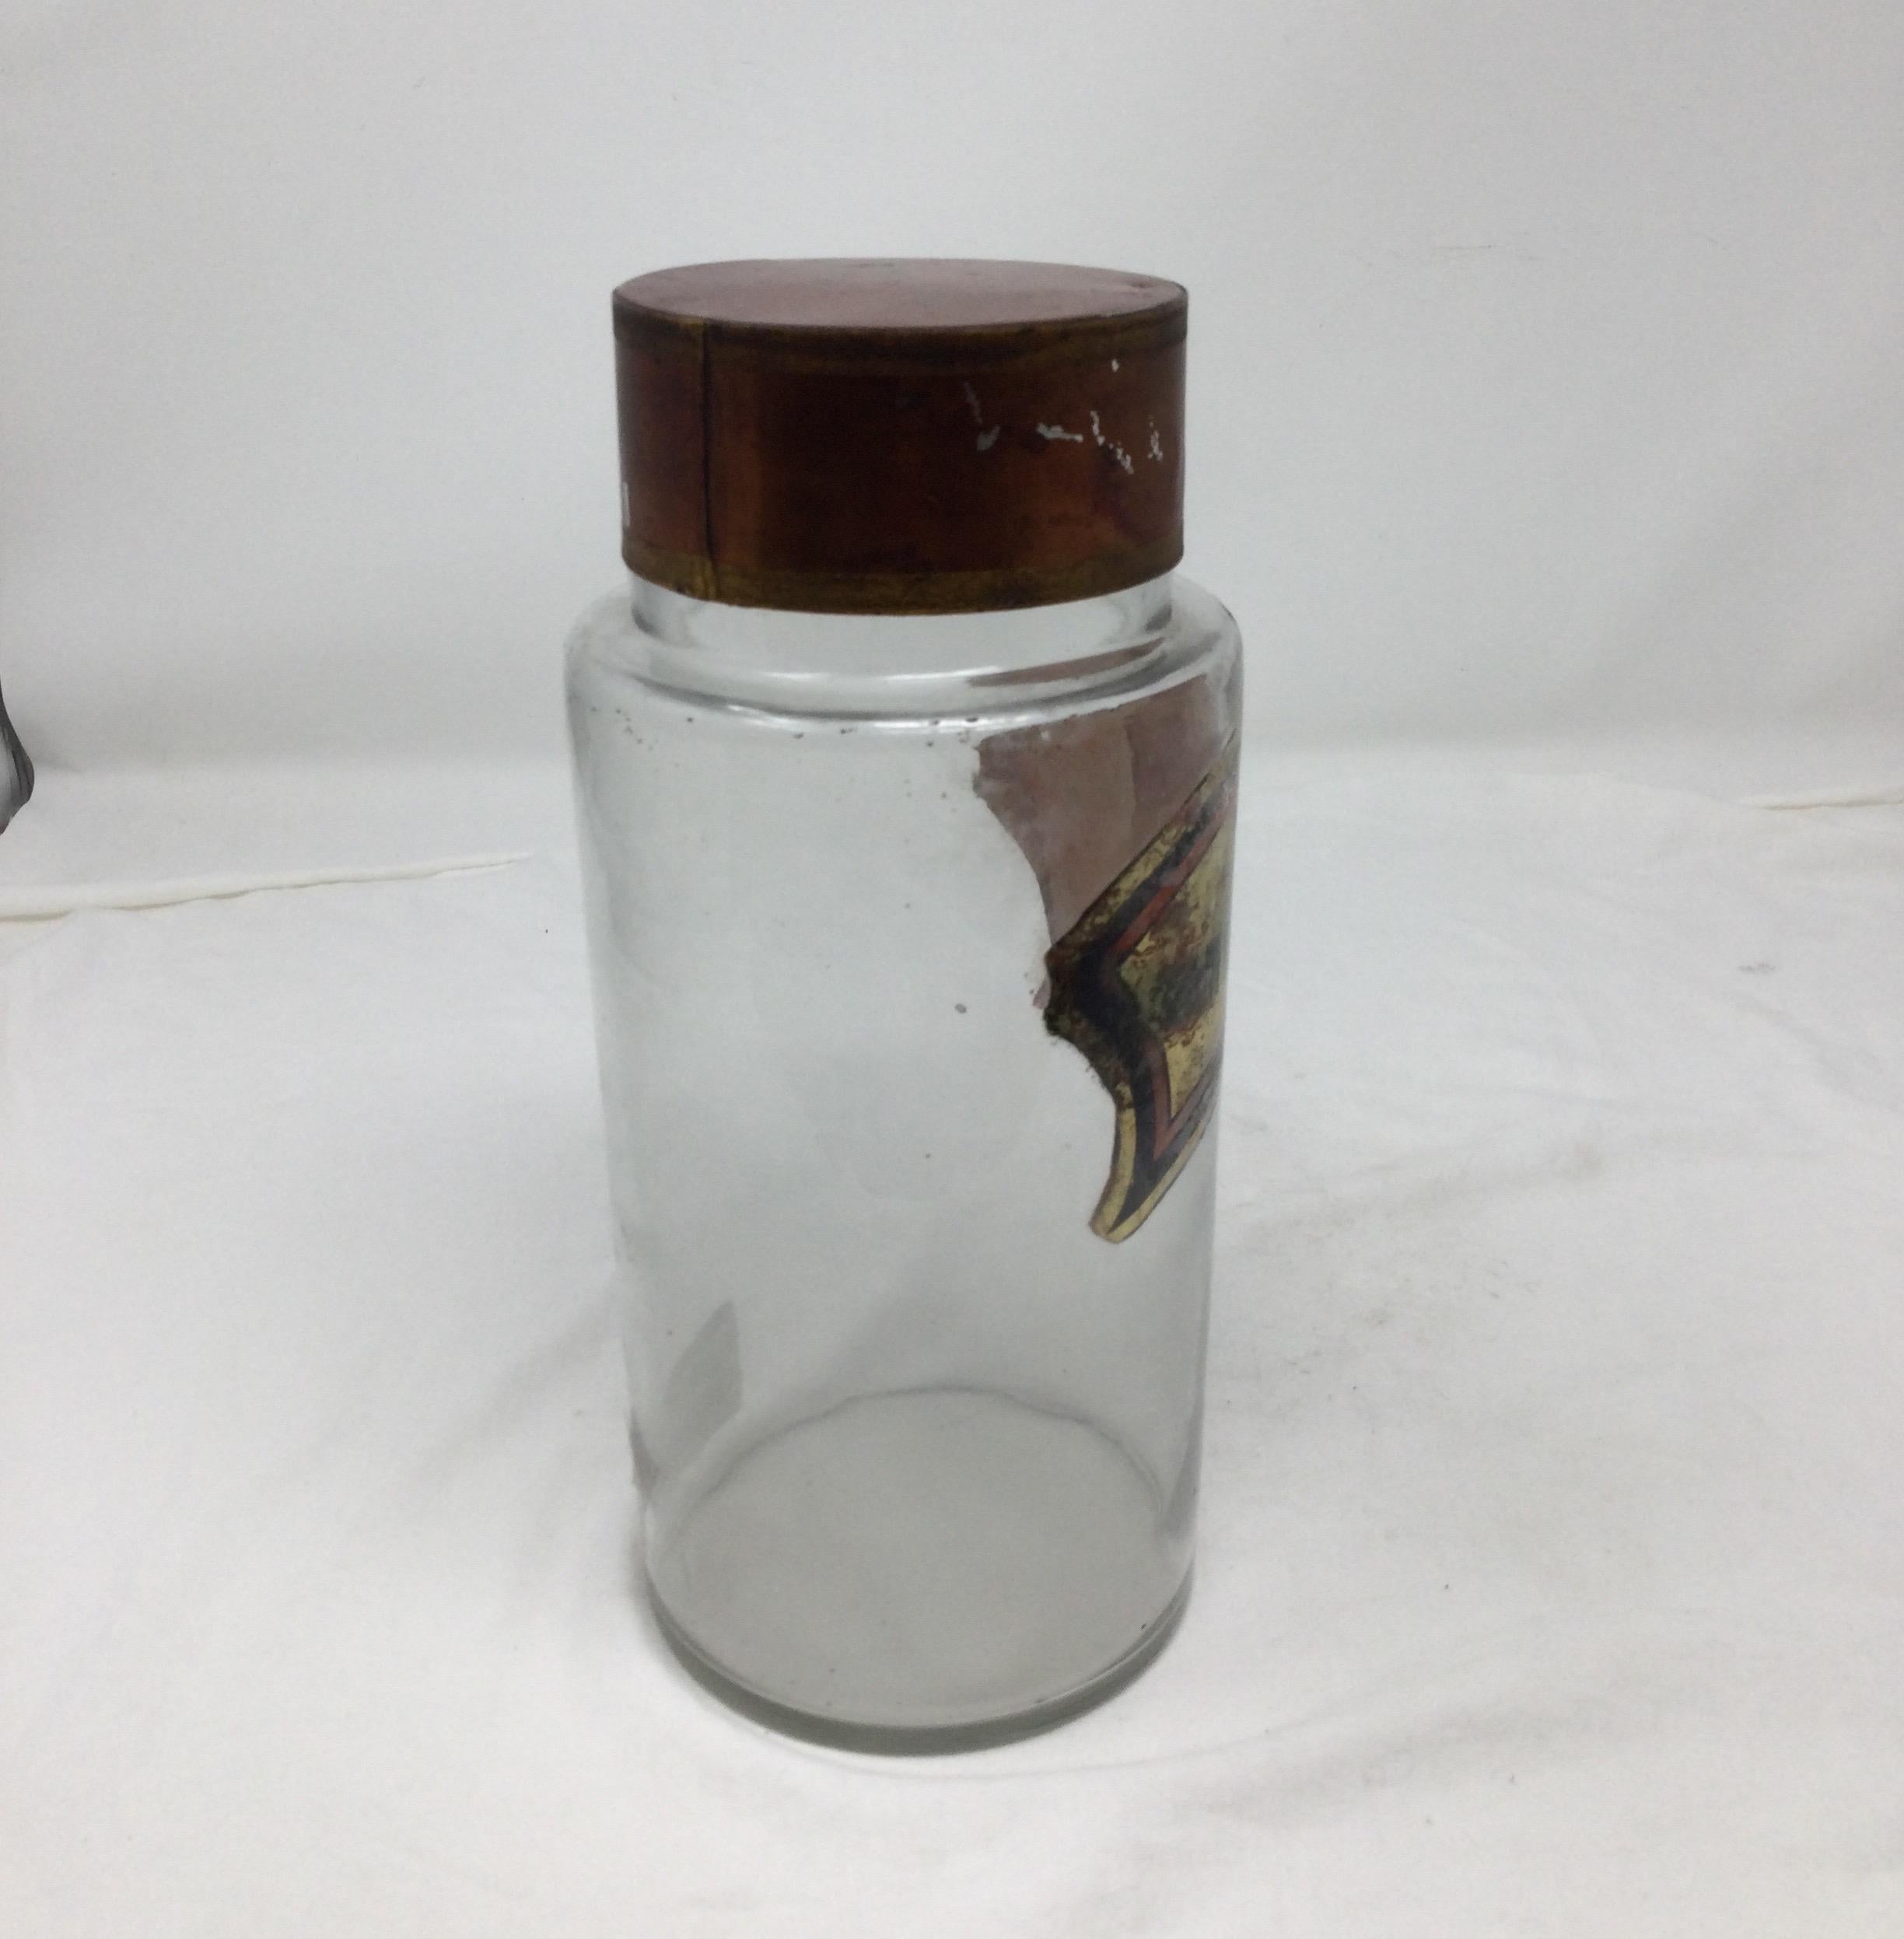 Antique pharmacy jar from France. Copper colored finish on lid. Label reading 